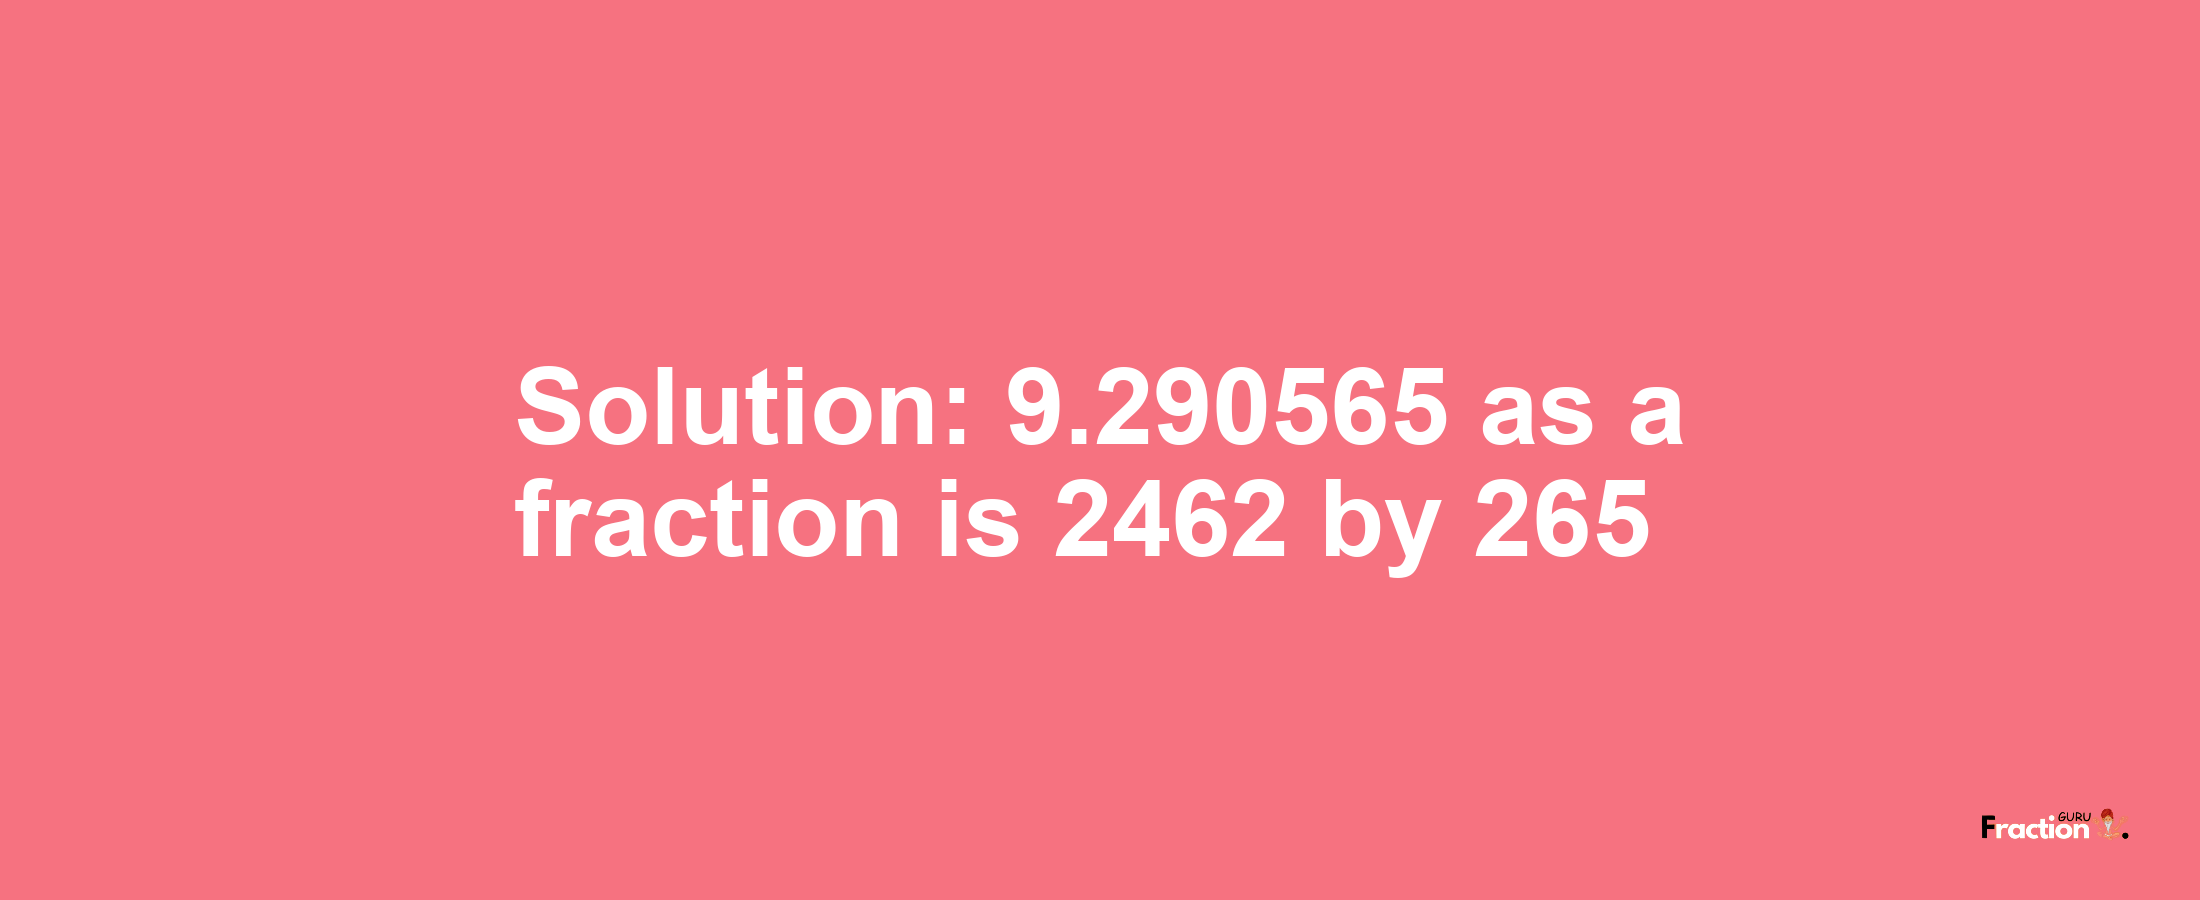 Solution:9.290565 as a fraction is 2462/265